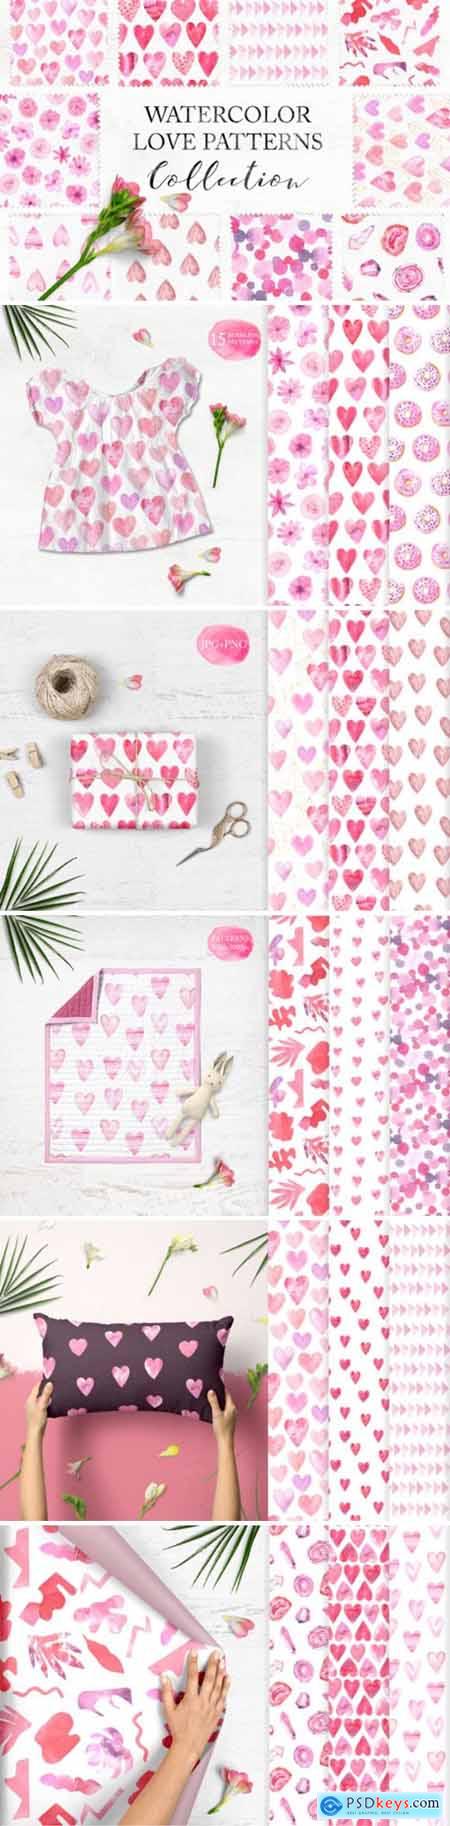 15 Watercolor Love Seamless Patterns 3546394